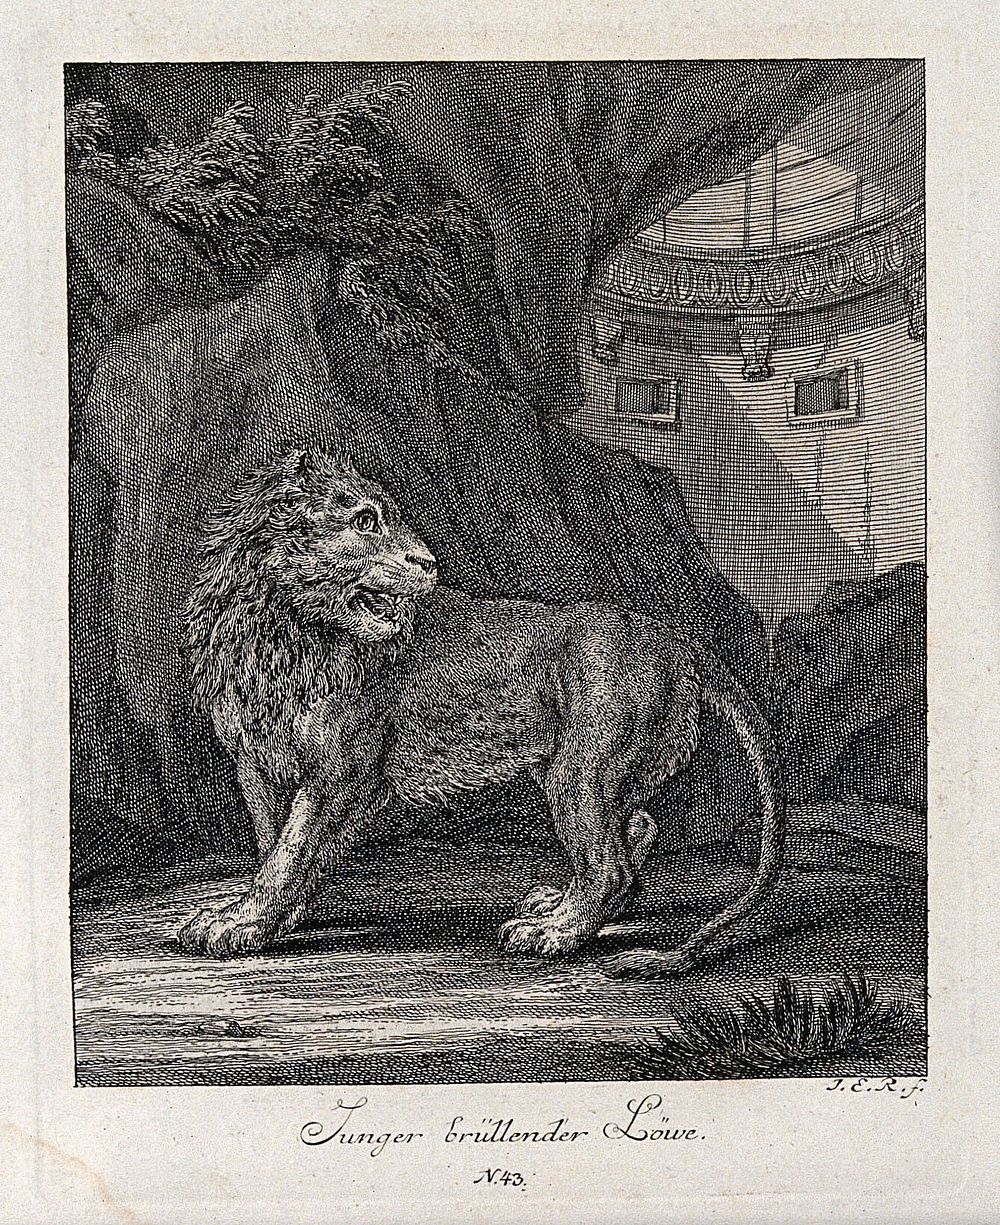 A young roaring lion in a cave with architecture in the background. Etching by J. E. Ridinger.